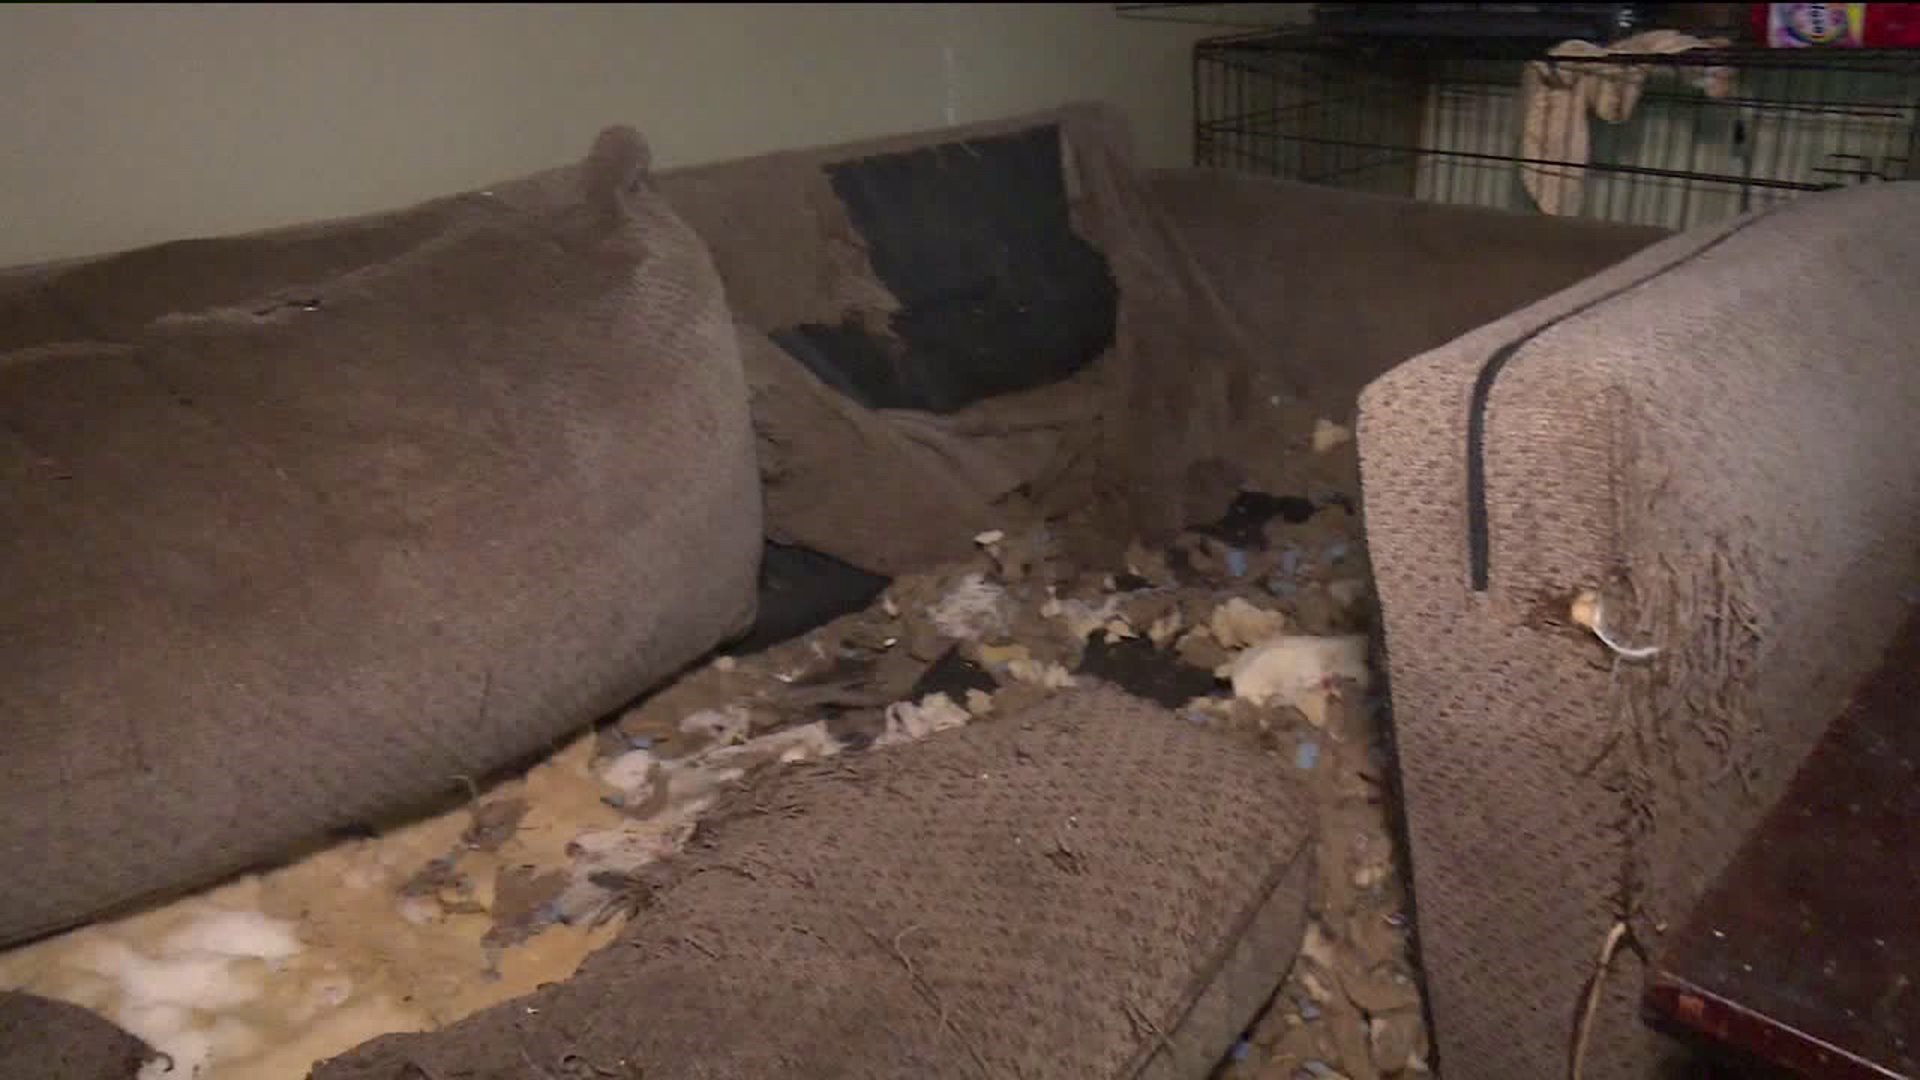 Pets Found in Filthy Conditions, Homeowner Arrested